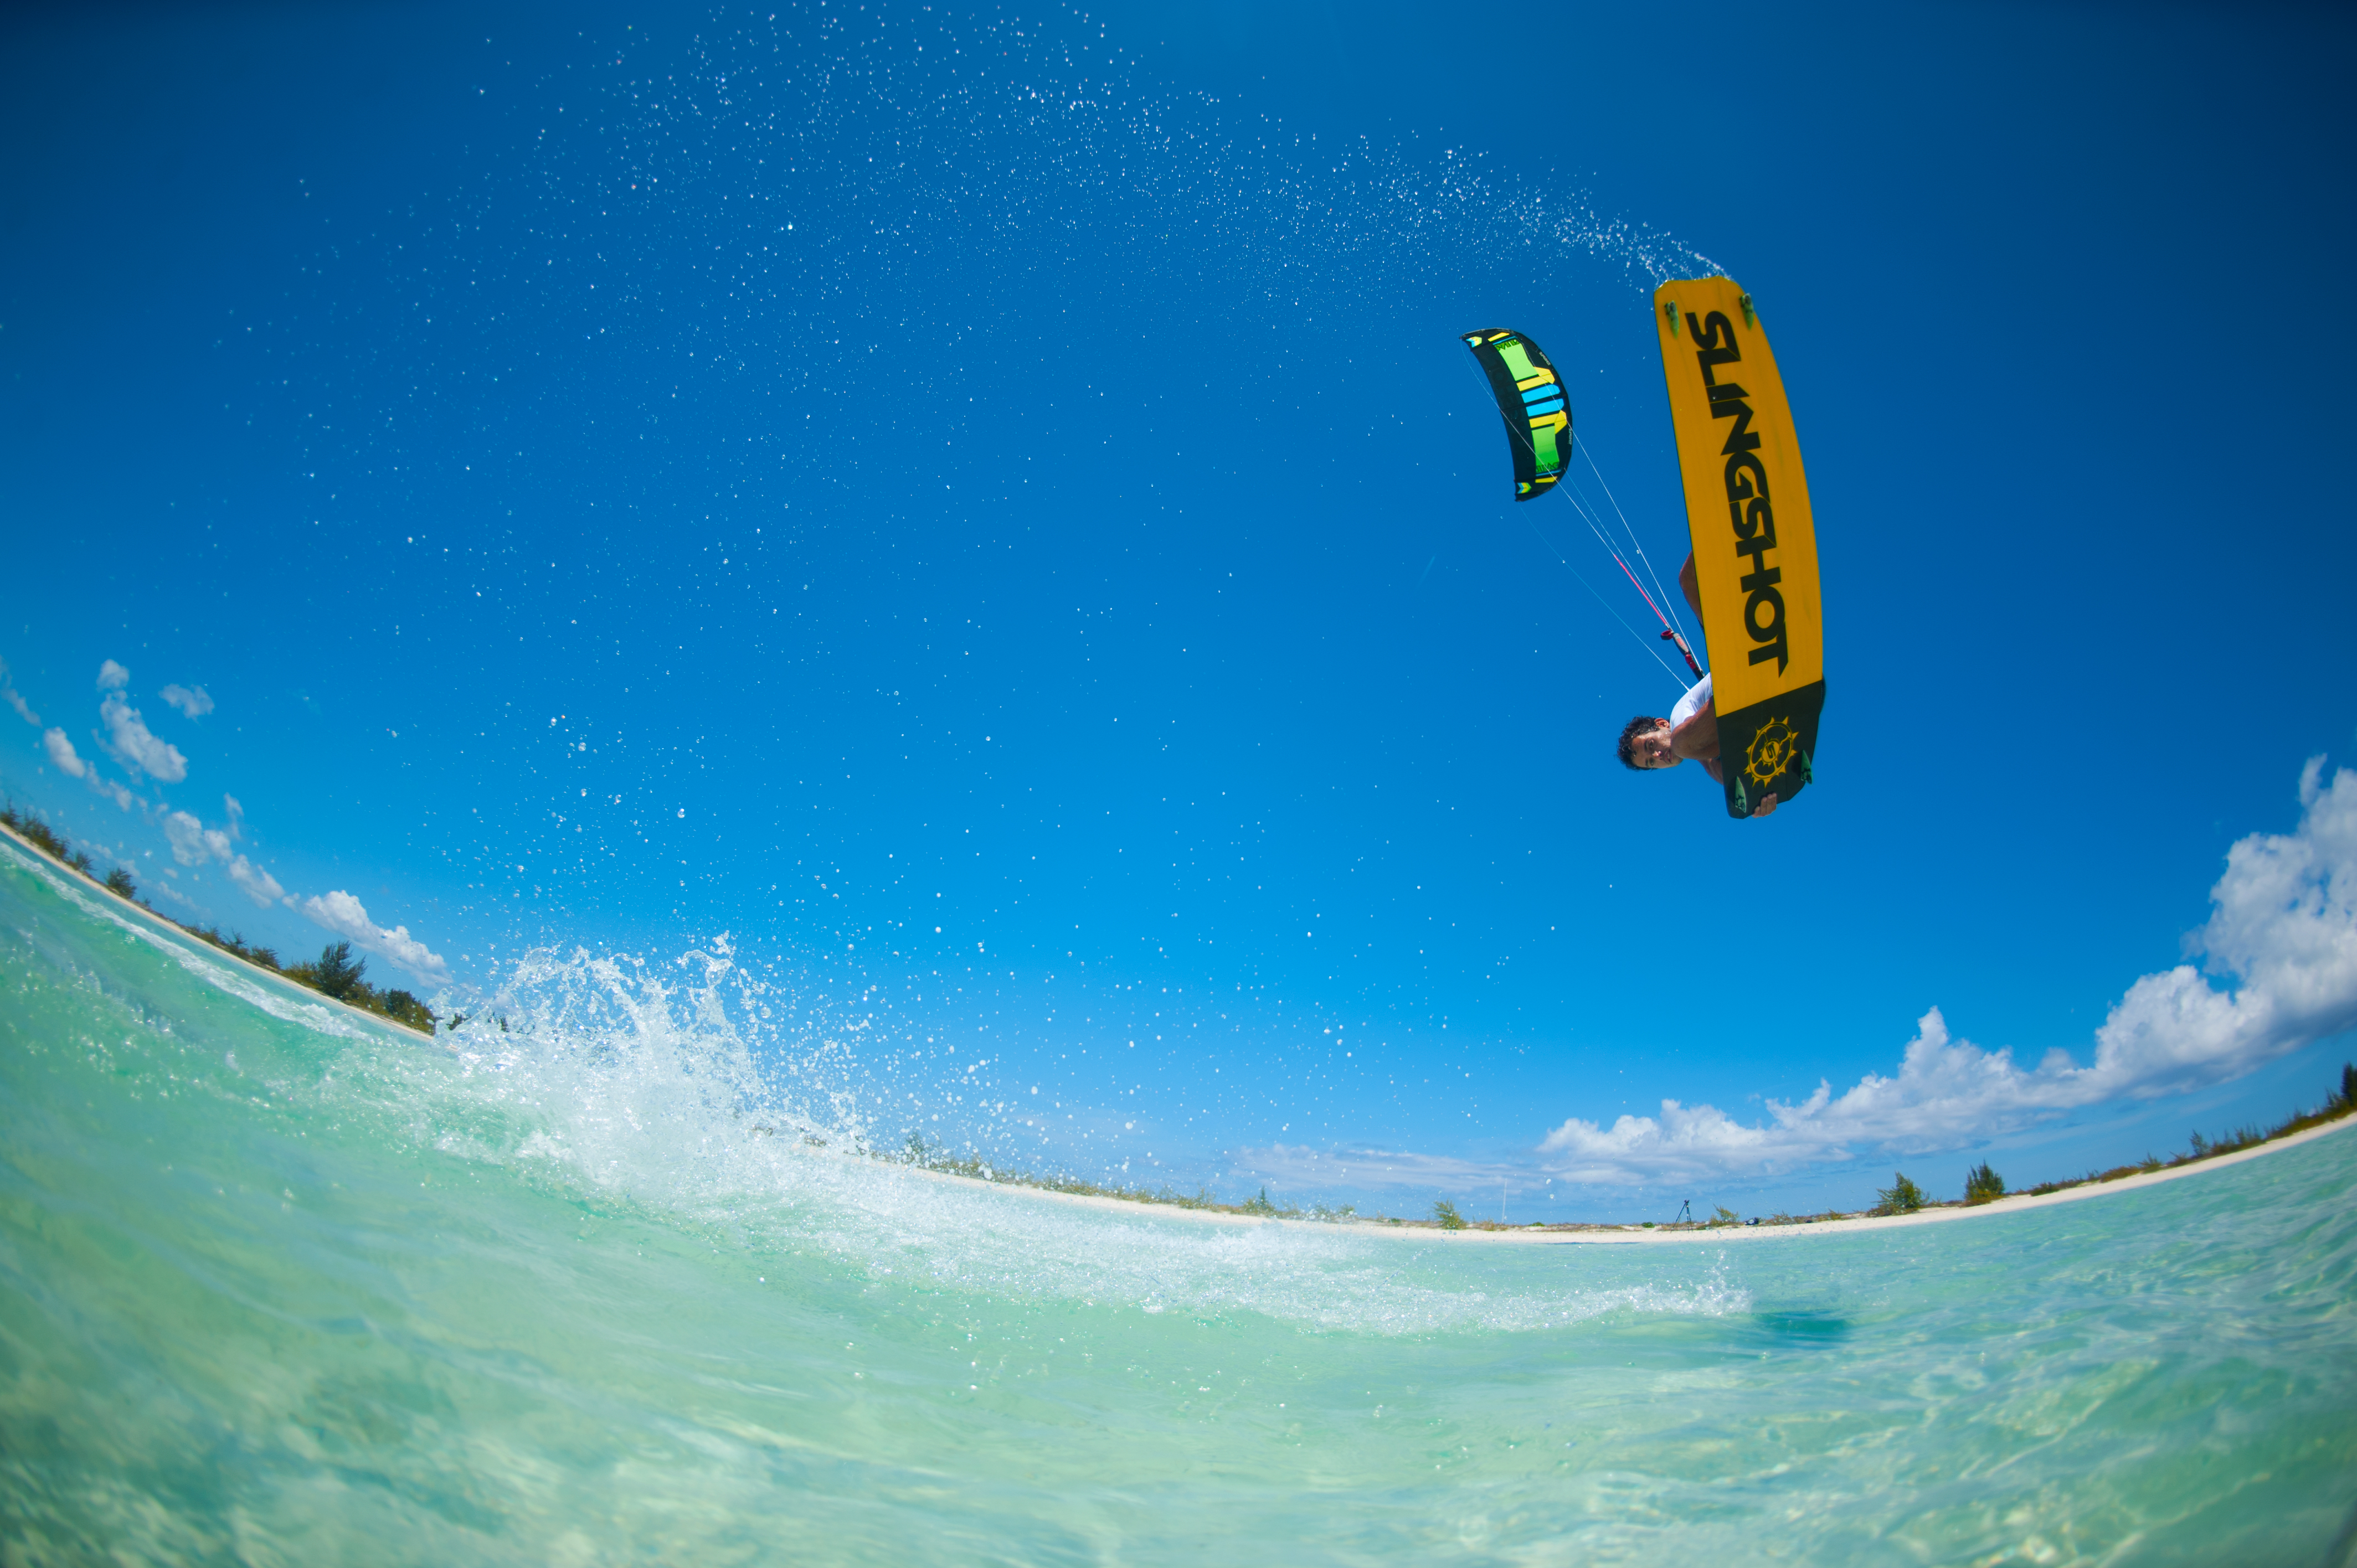 kitesurf wallpaper image - Kiteboarder Victor Hays with a jump and tail grab on the 2016 Slingshot Rally kite and Misfit kiteboard. - in resolution: Original 4256 X 2832